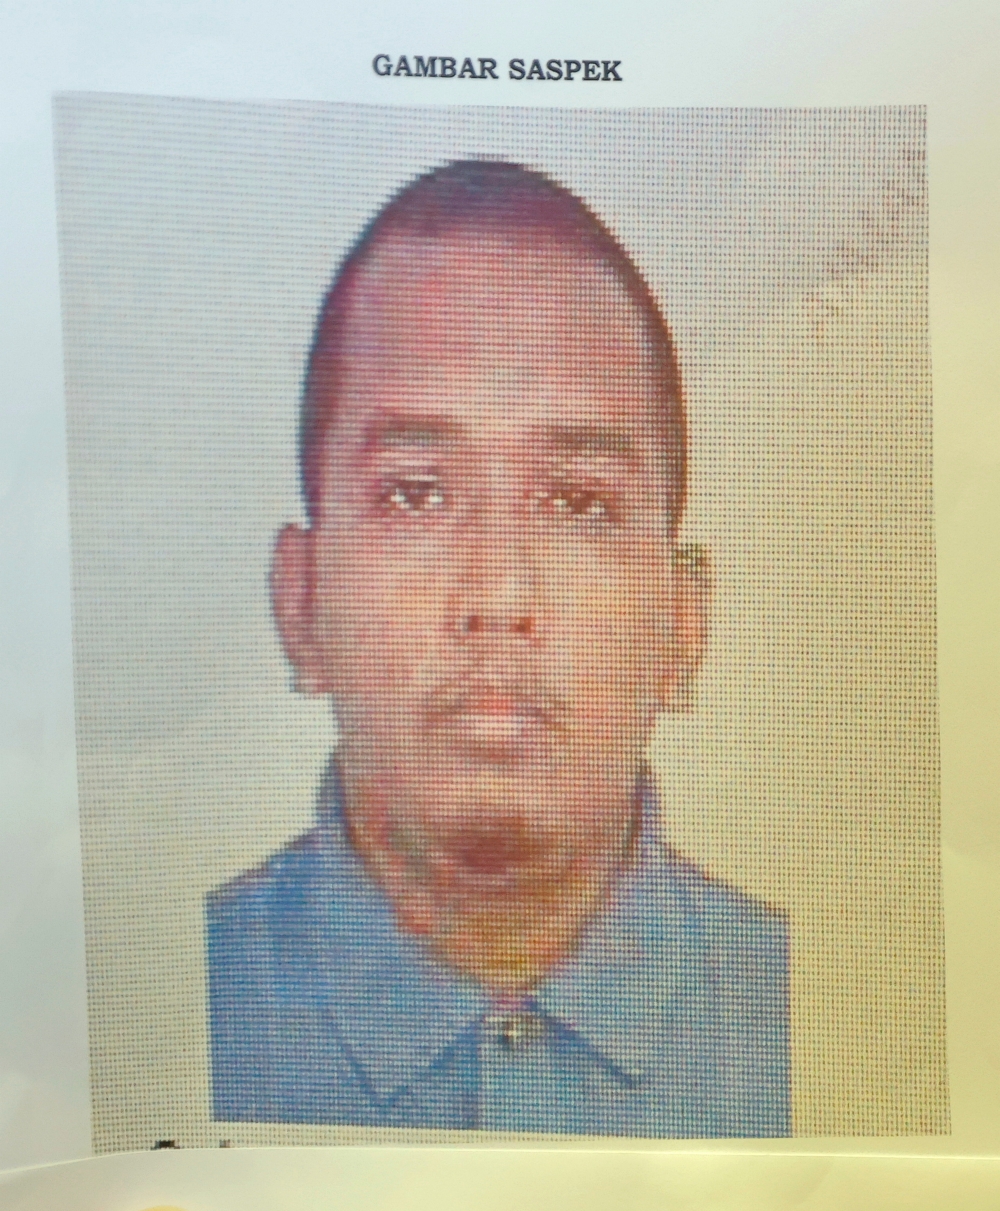 The suspected shooter who fled the scene was named as Hafizul Harawi, 38, Bukit Aman Criminal Investigation Department (CID) director Commissioner Datuk Seri Mohd Shuhaily Mohd Zain told a news conference at KLIA. — eNM pic